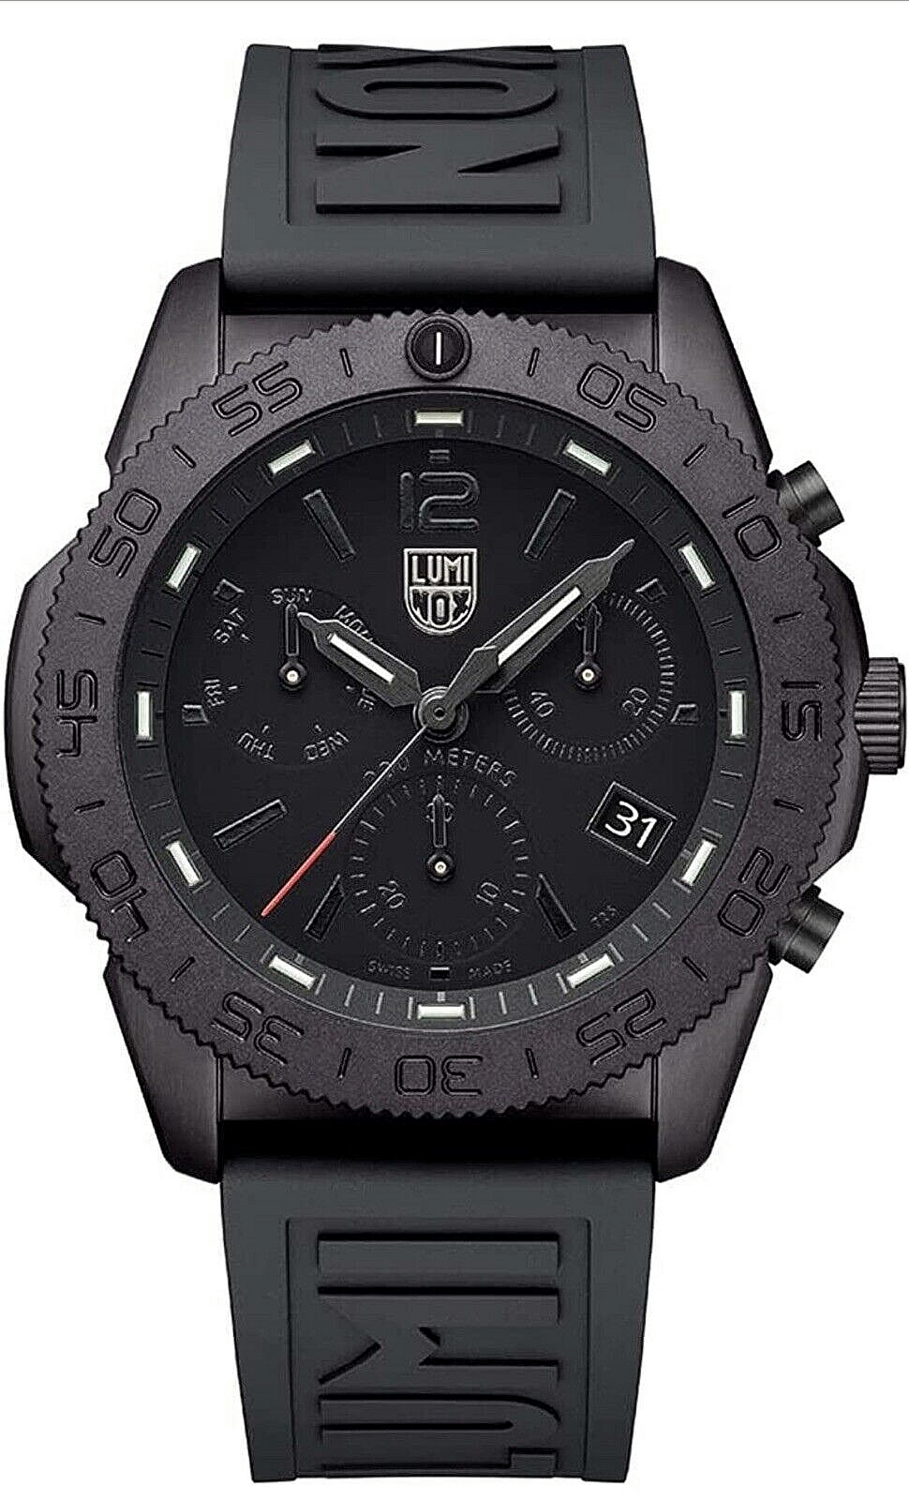 Luminox Pacific Diver Chronograph XS.3141.BO 44mm All Black Rubber Men's Watch
Sapphire with anti-reflection coating Crystal 200m water resist sport quartz men's watch SWISS MADE